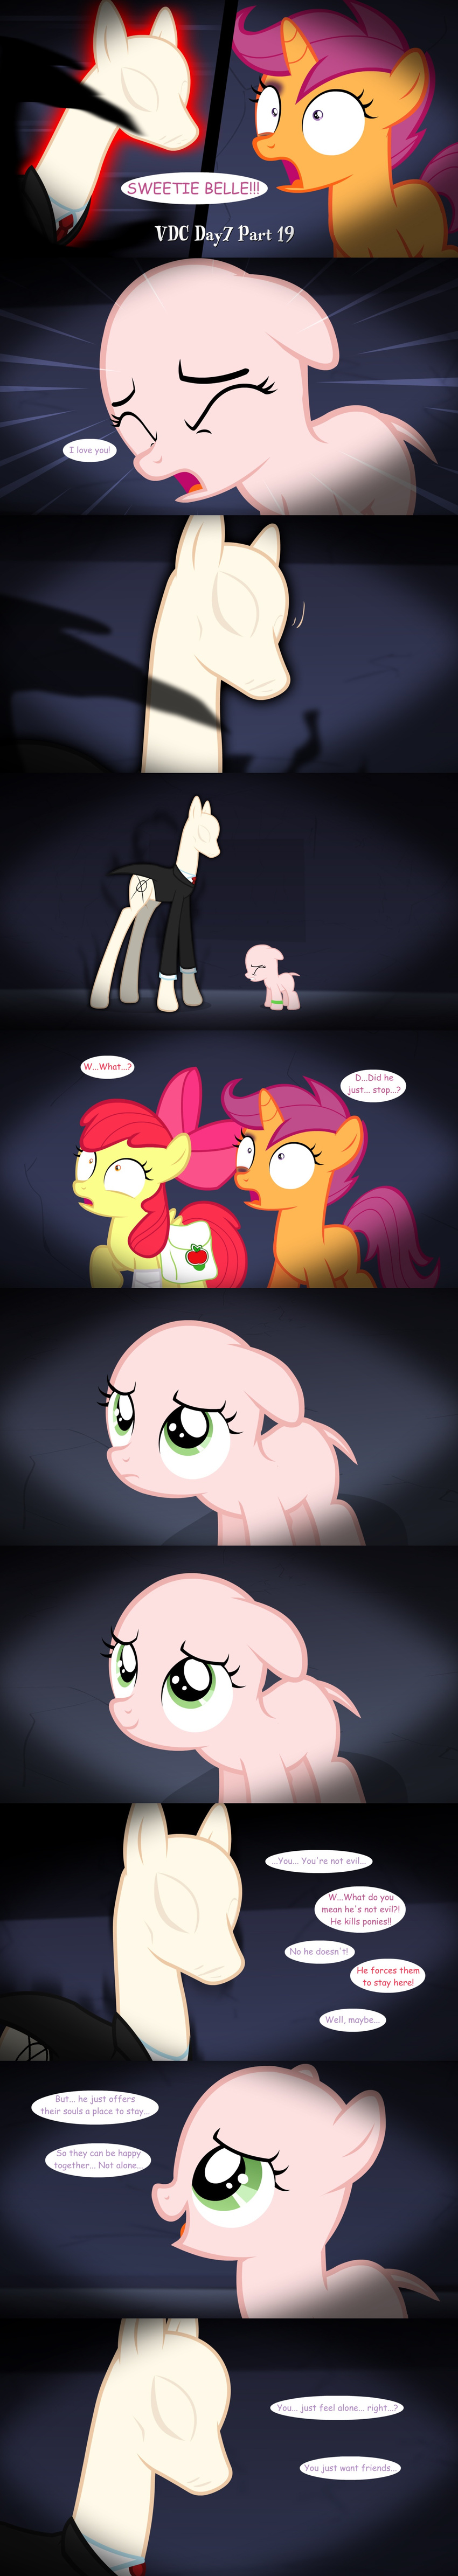 bald comic cutie_mark_crusaders_(mlp) equine female feral friendship_is_magic horn horse jananimations mammal mansion my_little_pony pegasus pony scared scootaloo_(mlp) shiner slenderman sweetie_belle_(mlp) tumblr unicorn wings young